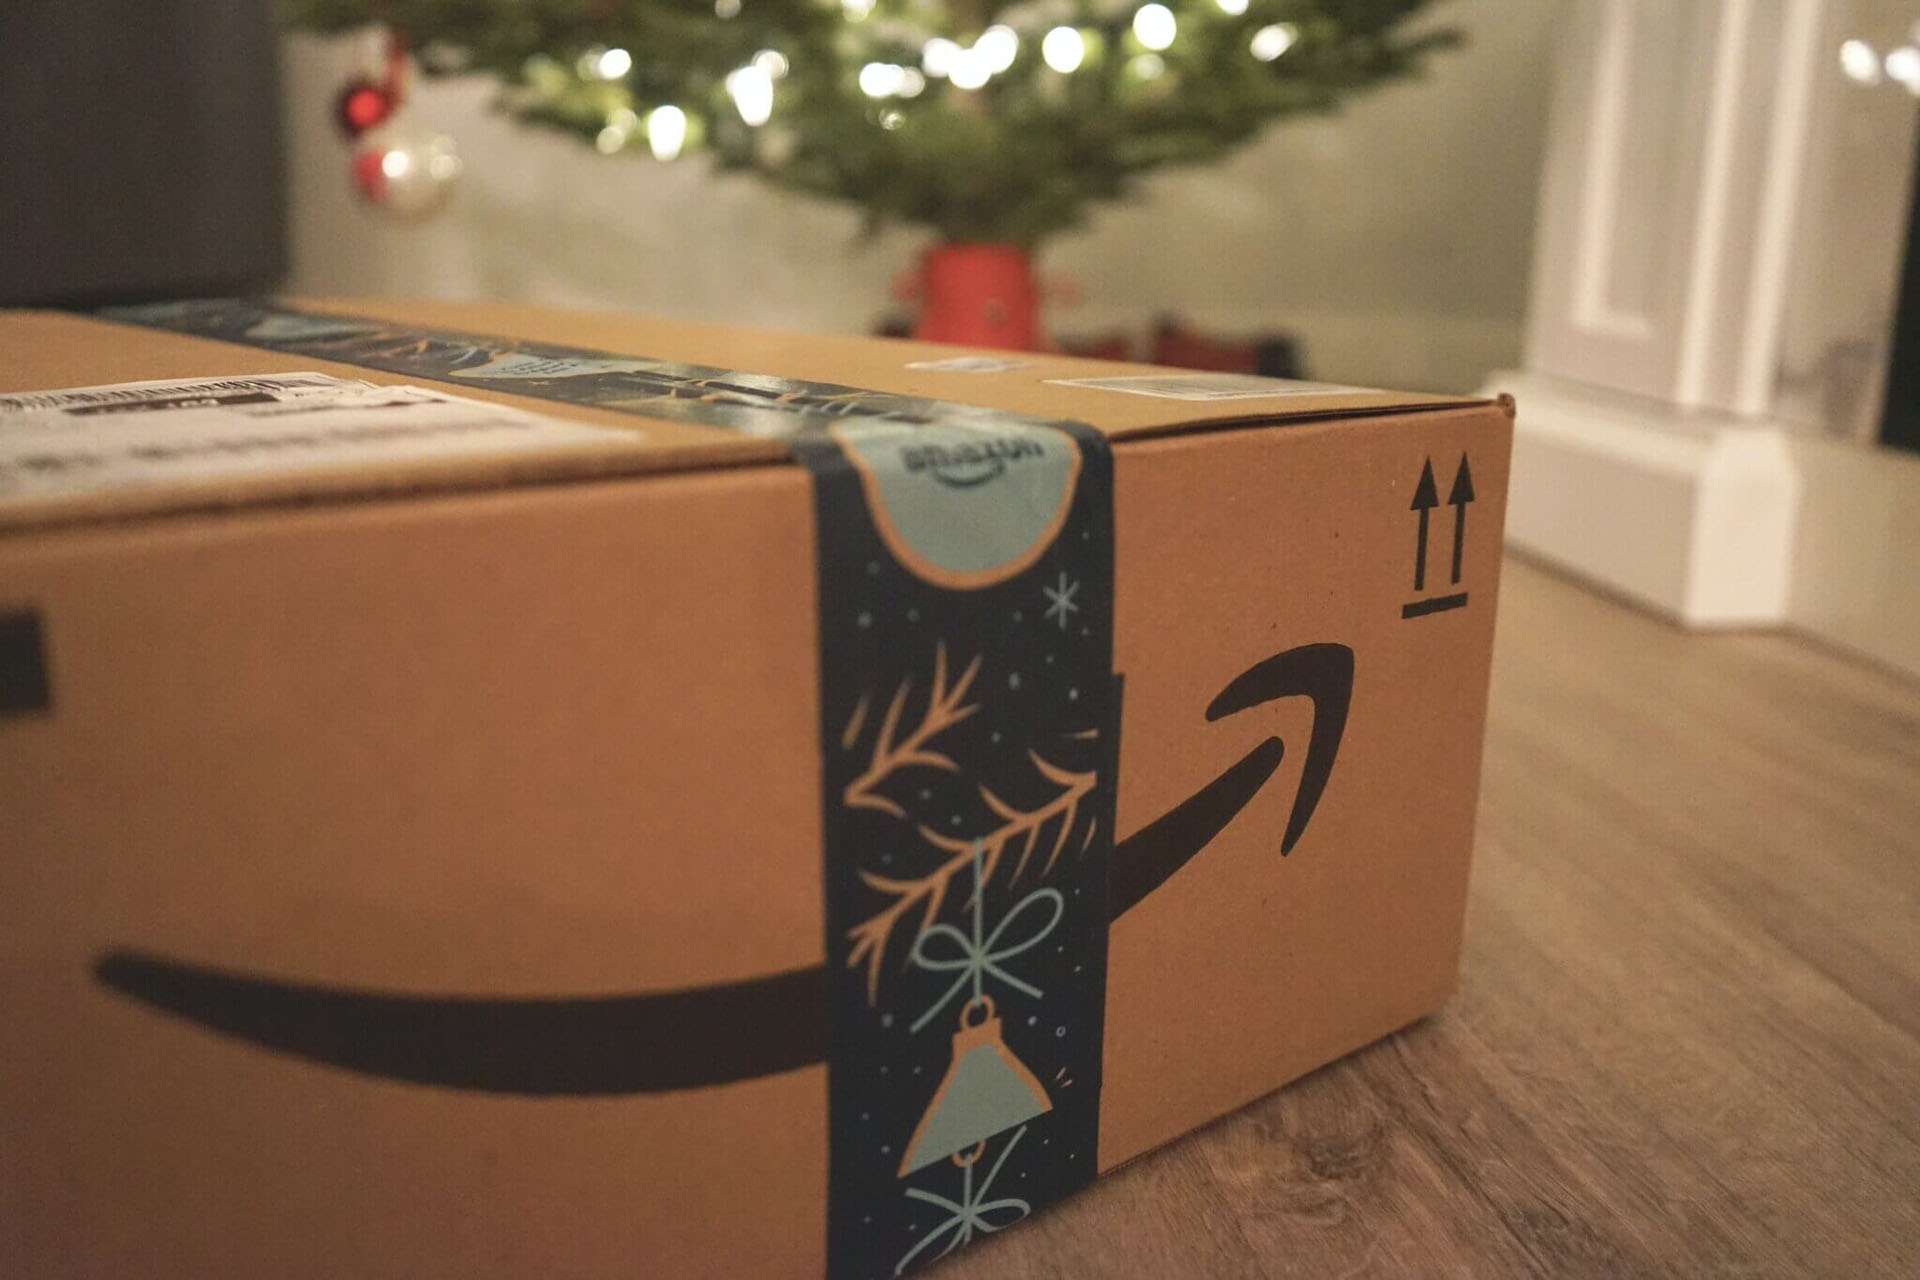 A close-up photo of an Amazon delivery box on the floor with a Christmas tree visible in the background.